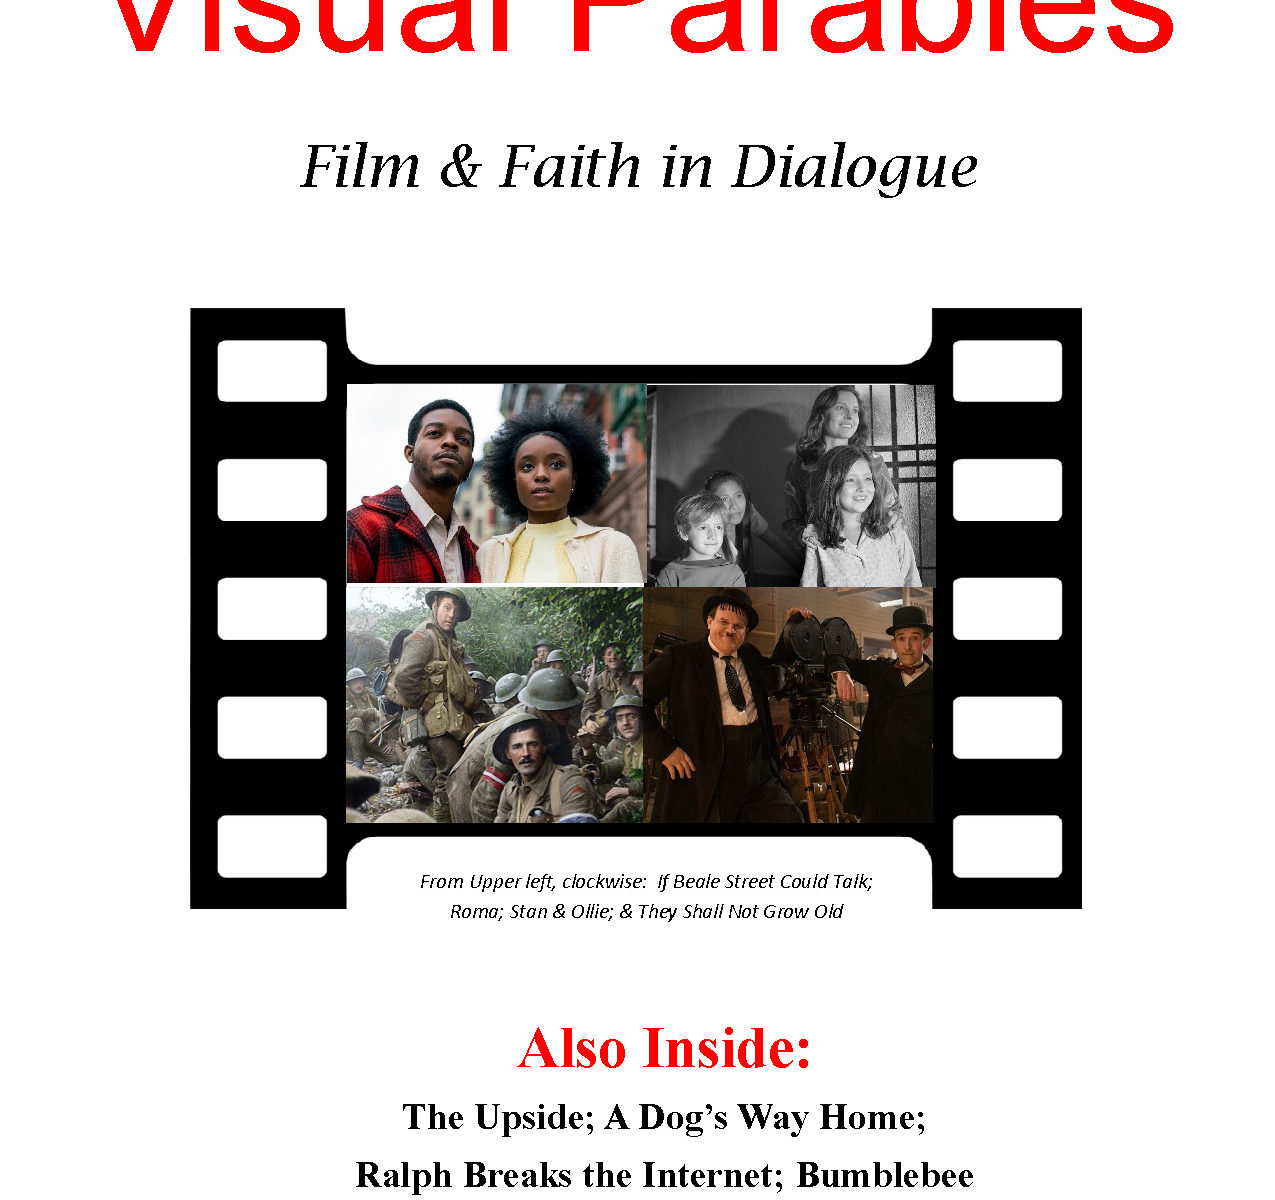 Visual Parables February 2019 issue